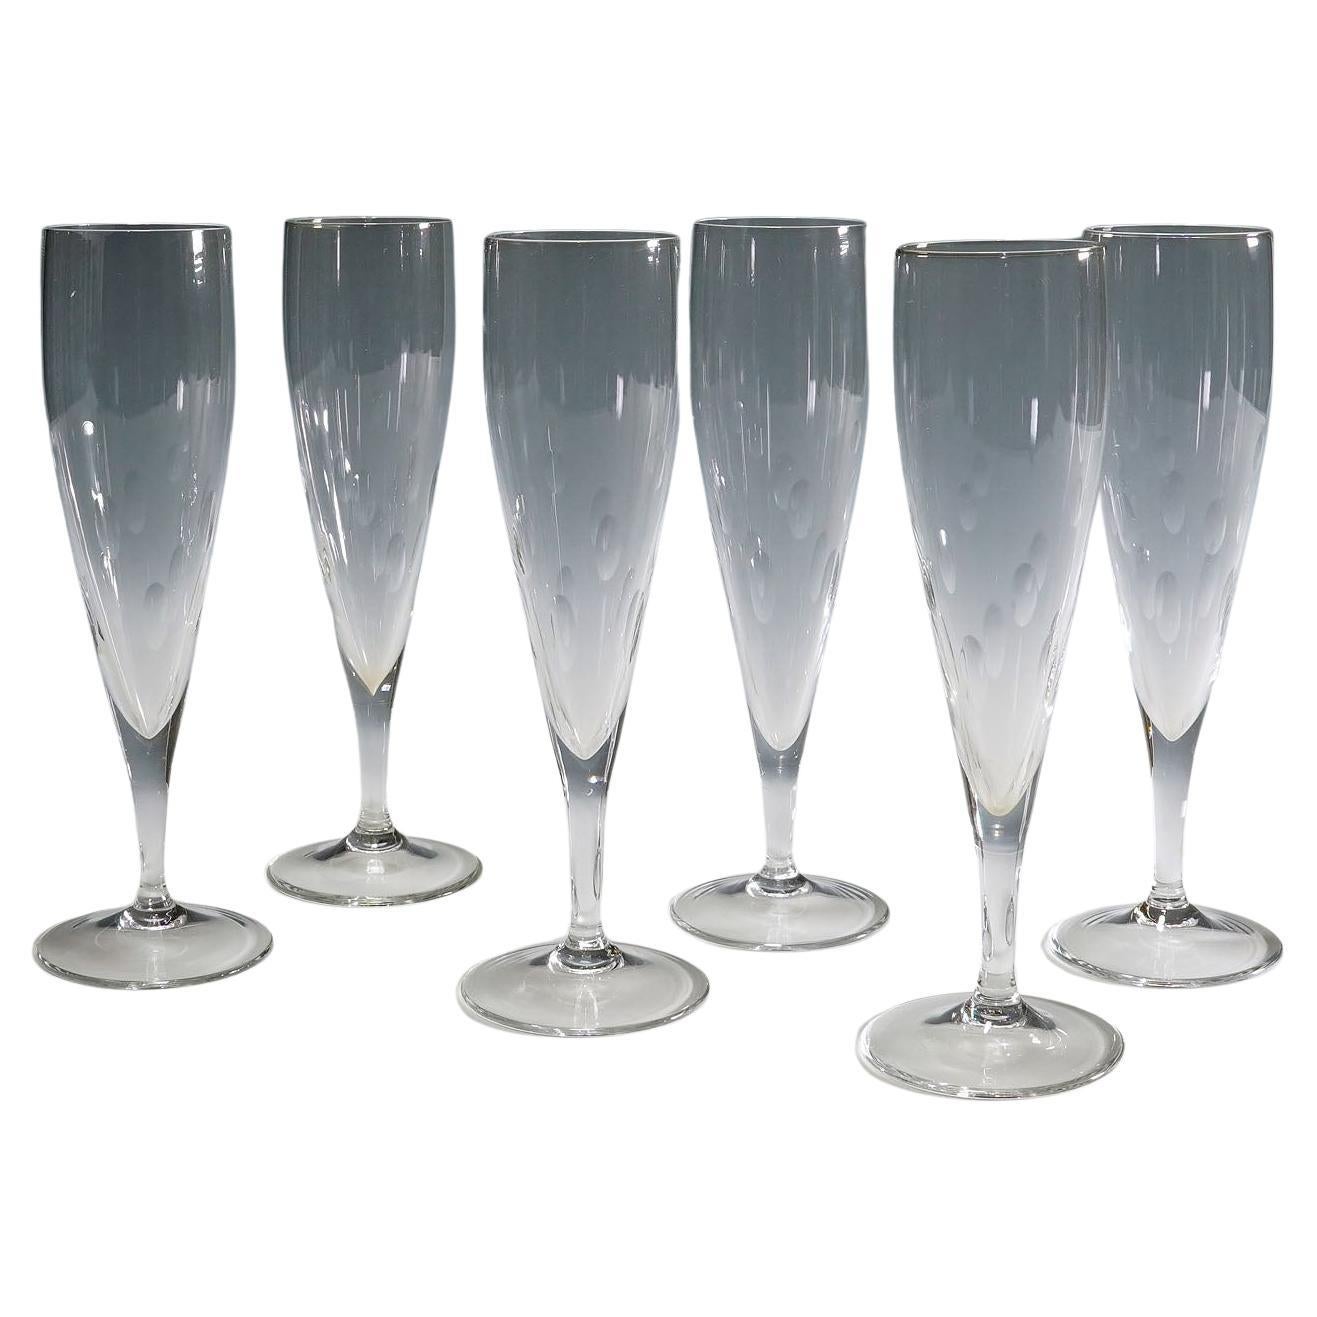 Set of Six Champagne Flutes by Wagenfeld for Wmf, Germany, 1950s